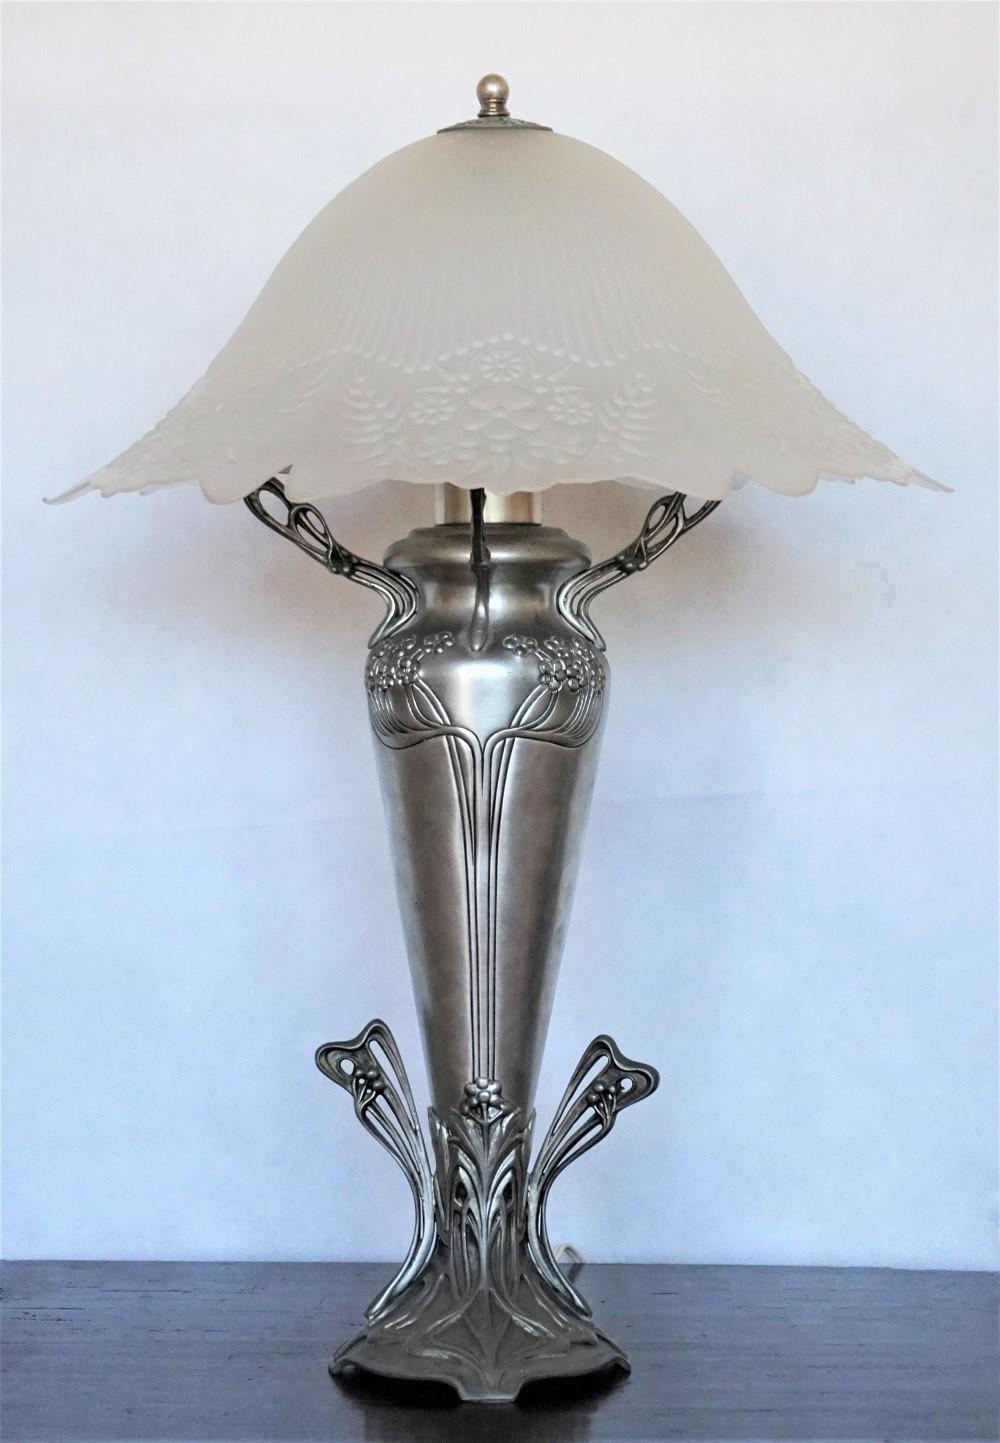 A large Art Deco handcrafted pewter vase shape table lamp with beautiful high relief glass shade, France 1930s.
One E27 light bulb socket.
Measures:
Height 25 in (63.5 cm)
Diameter 16 (40.5 cm).